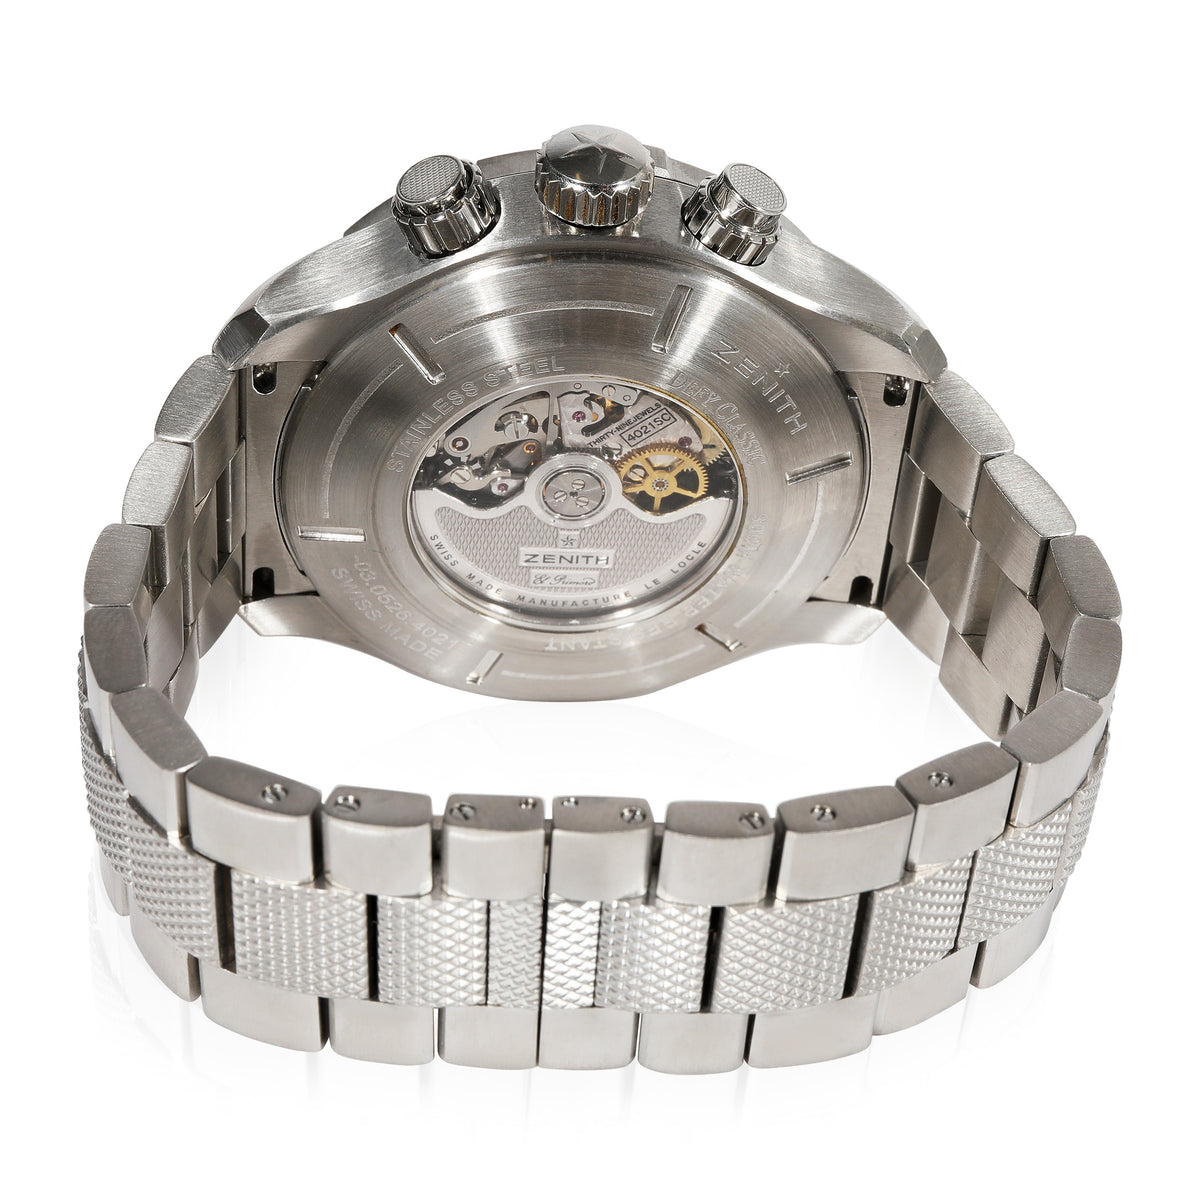 Defy Classic 03.0526.4021 Men's Watch in  Stainless Steel